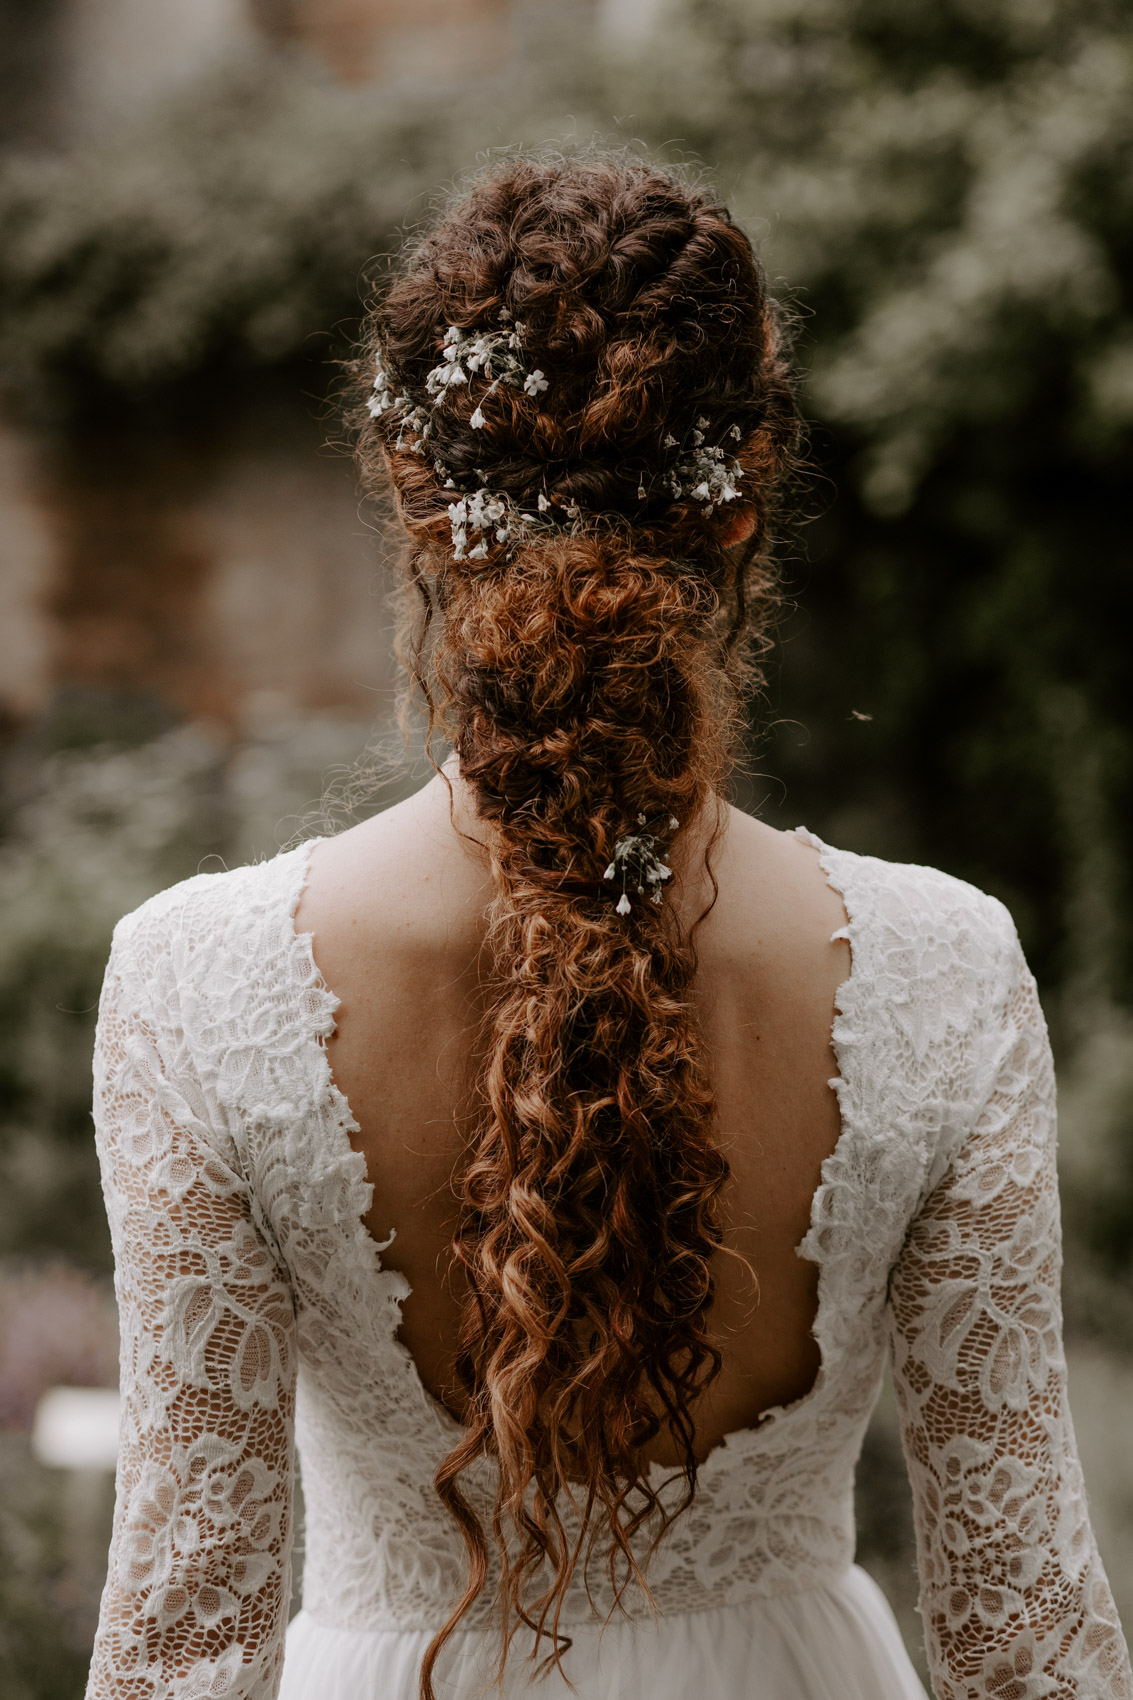 30 Boho Wedding Hairstyles for Every Hair Type